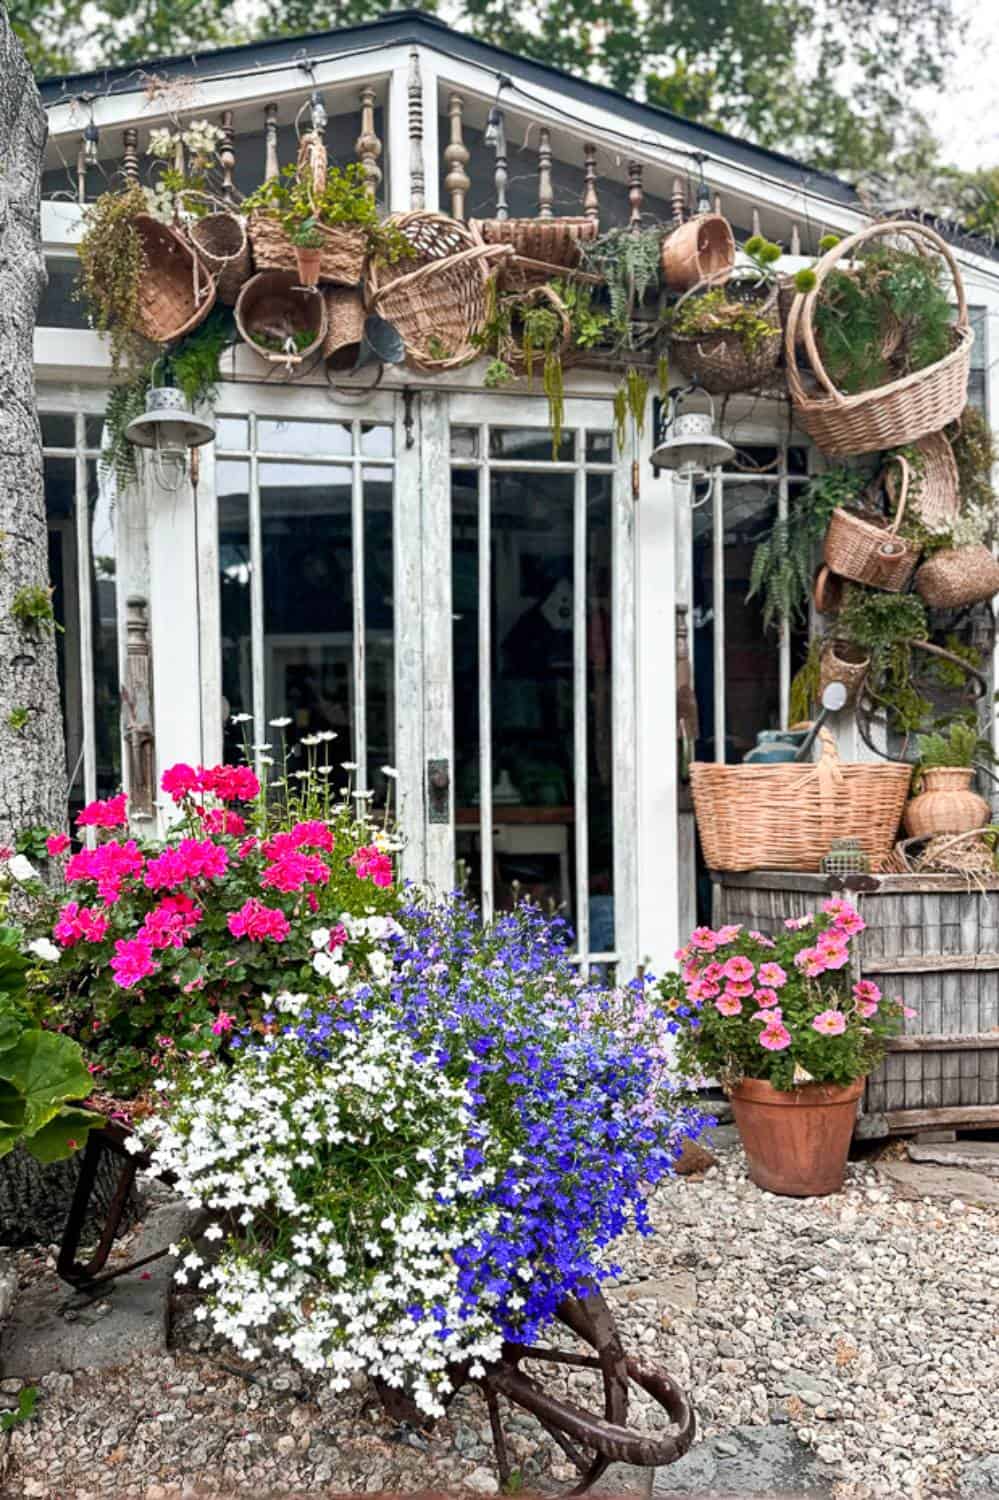 She Shed decorated for summer with a basket decor arch